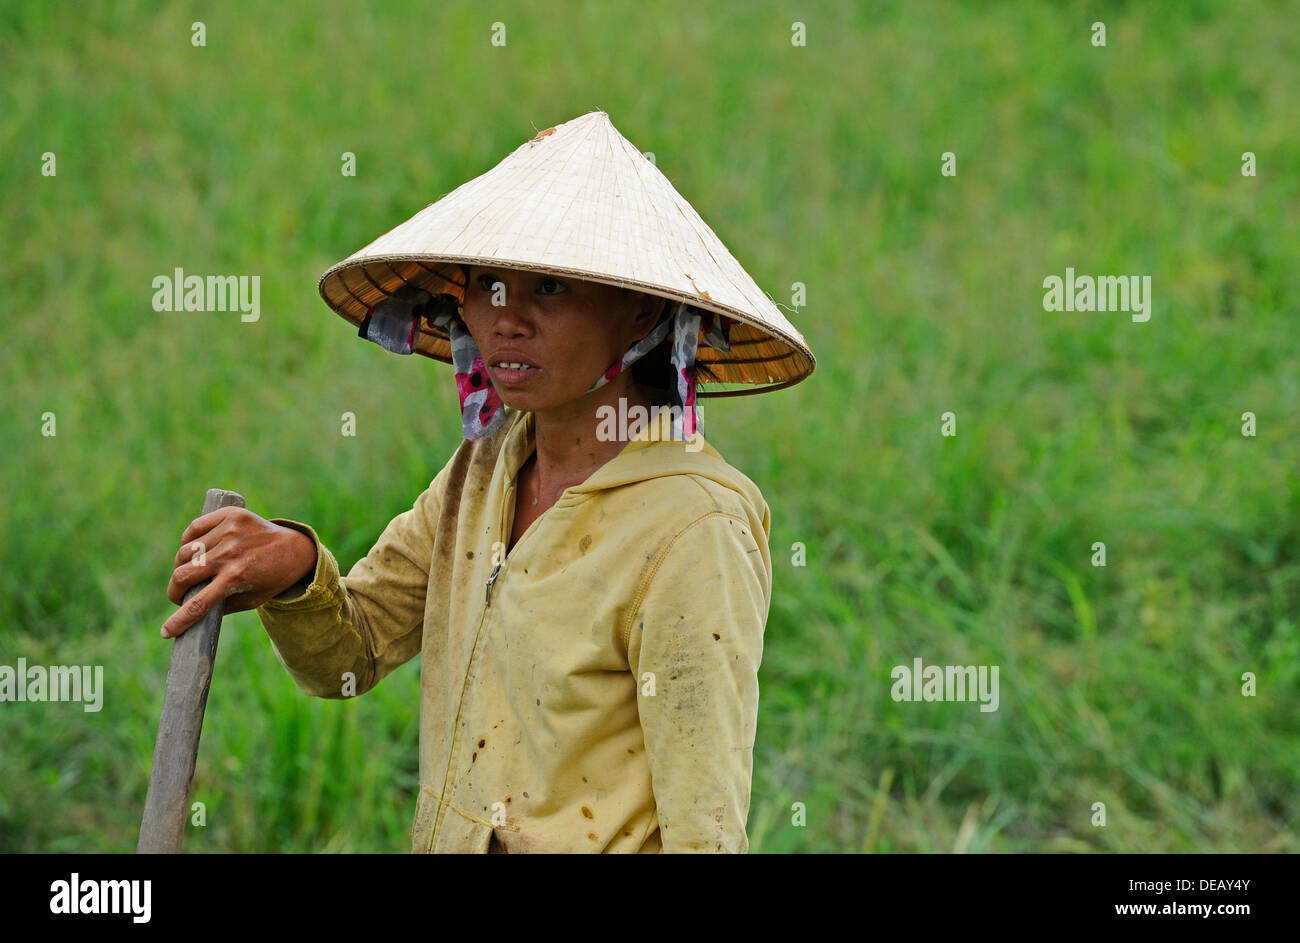 Female Vietnamese working in a rice paddy field wearing the traditional conical hat for sun protection and shade. Stock Photo